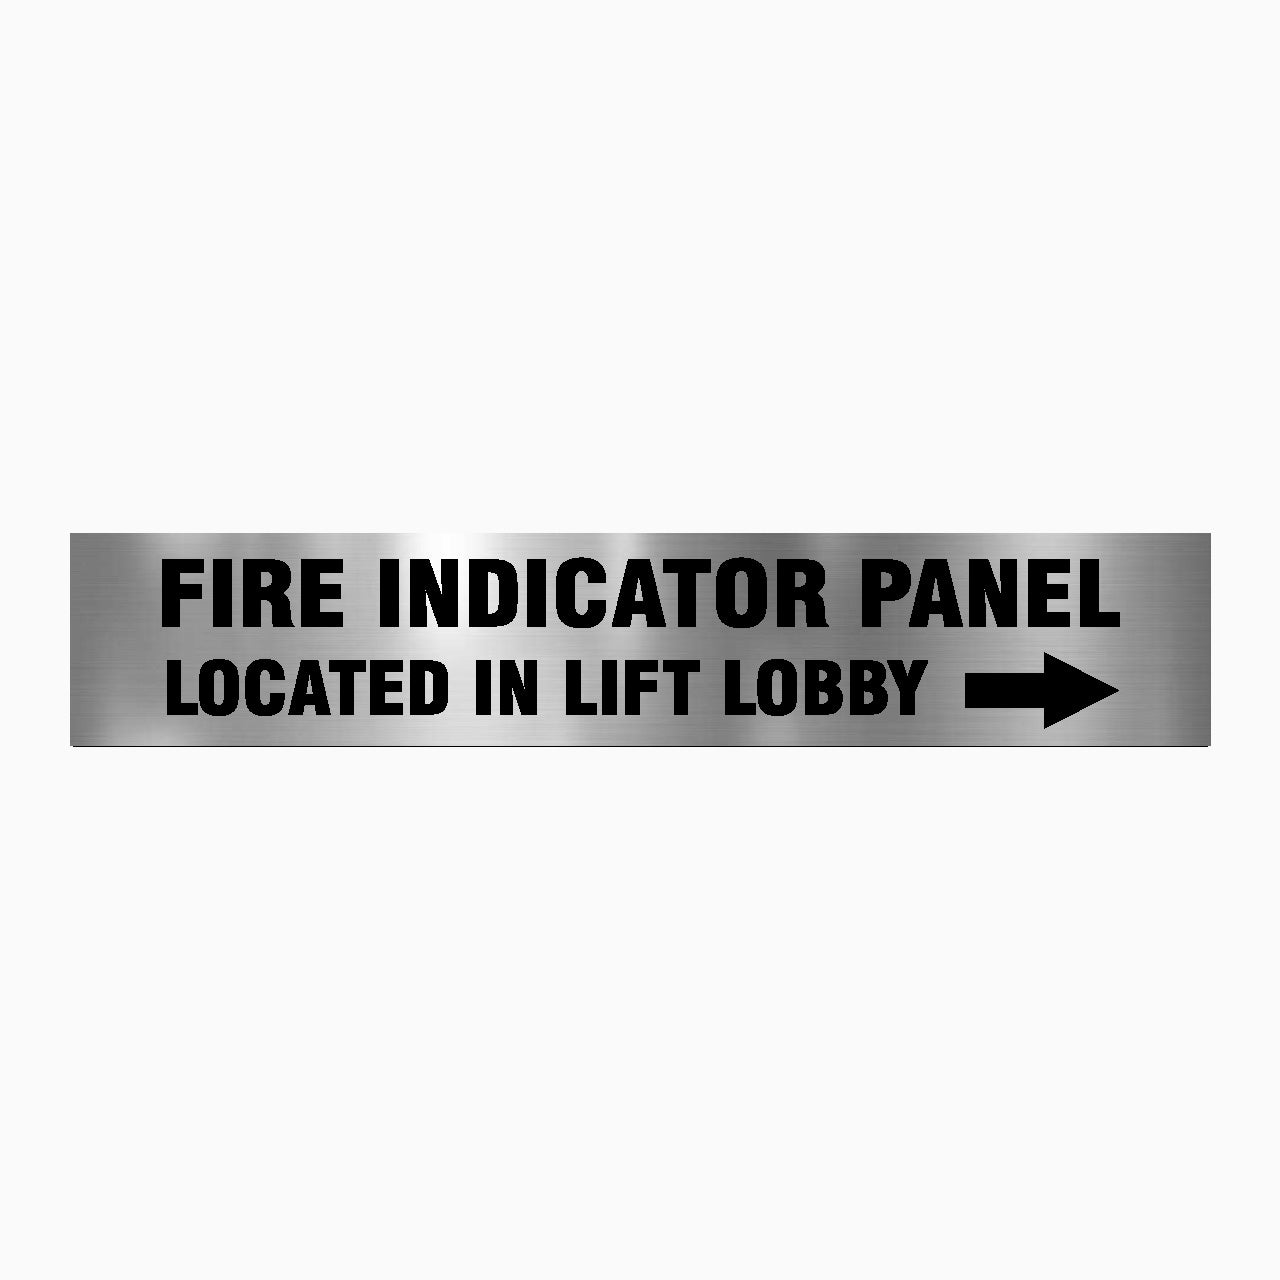 FIRE INDICATOR PANEL LOCATED IN LIFT LOBBY (RIGHT ARROW) SIGN